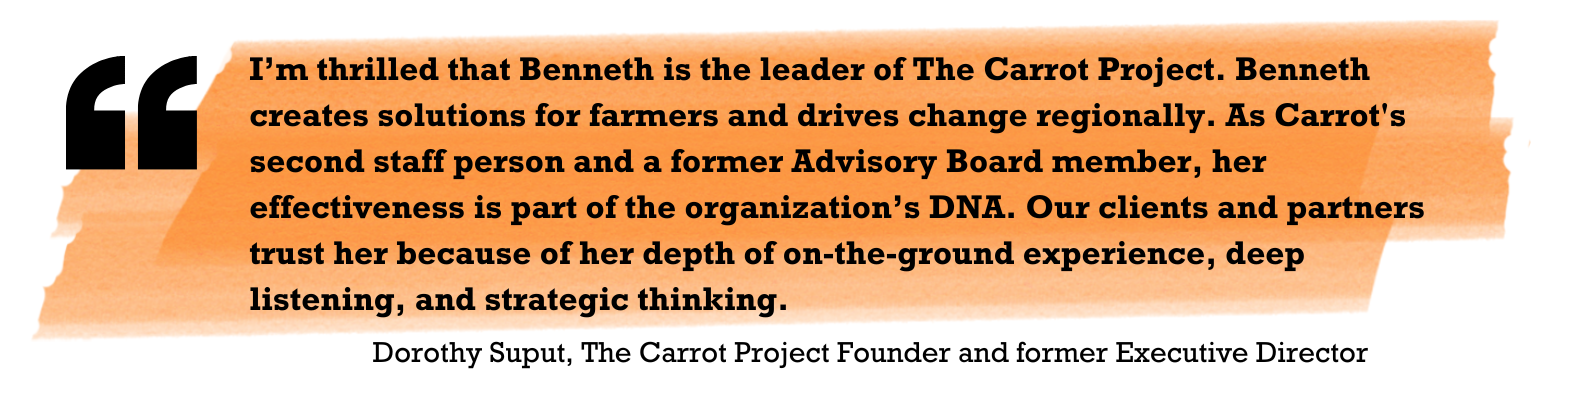 "I’m thrilled that Benneth is the leader of The Carrot Project. Benneth creates solutions for farmers and drives change regionally. As the second staff person and a former Advisory Board member, her effectiveness is part of the organization’s DNA. Our clients and partners trust her because of her depth of on-the-ground experience, deep listening, and strategic thinking." Dorothy Suput, The Carrot Project Founder and former Executive Director 